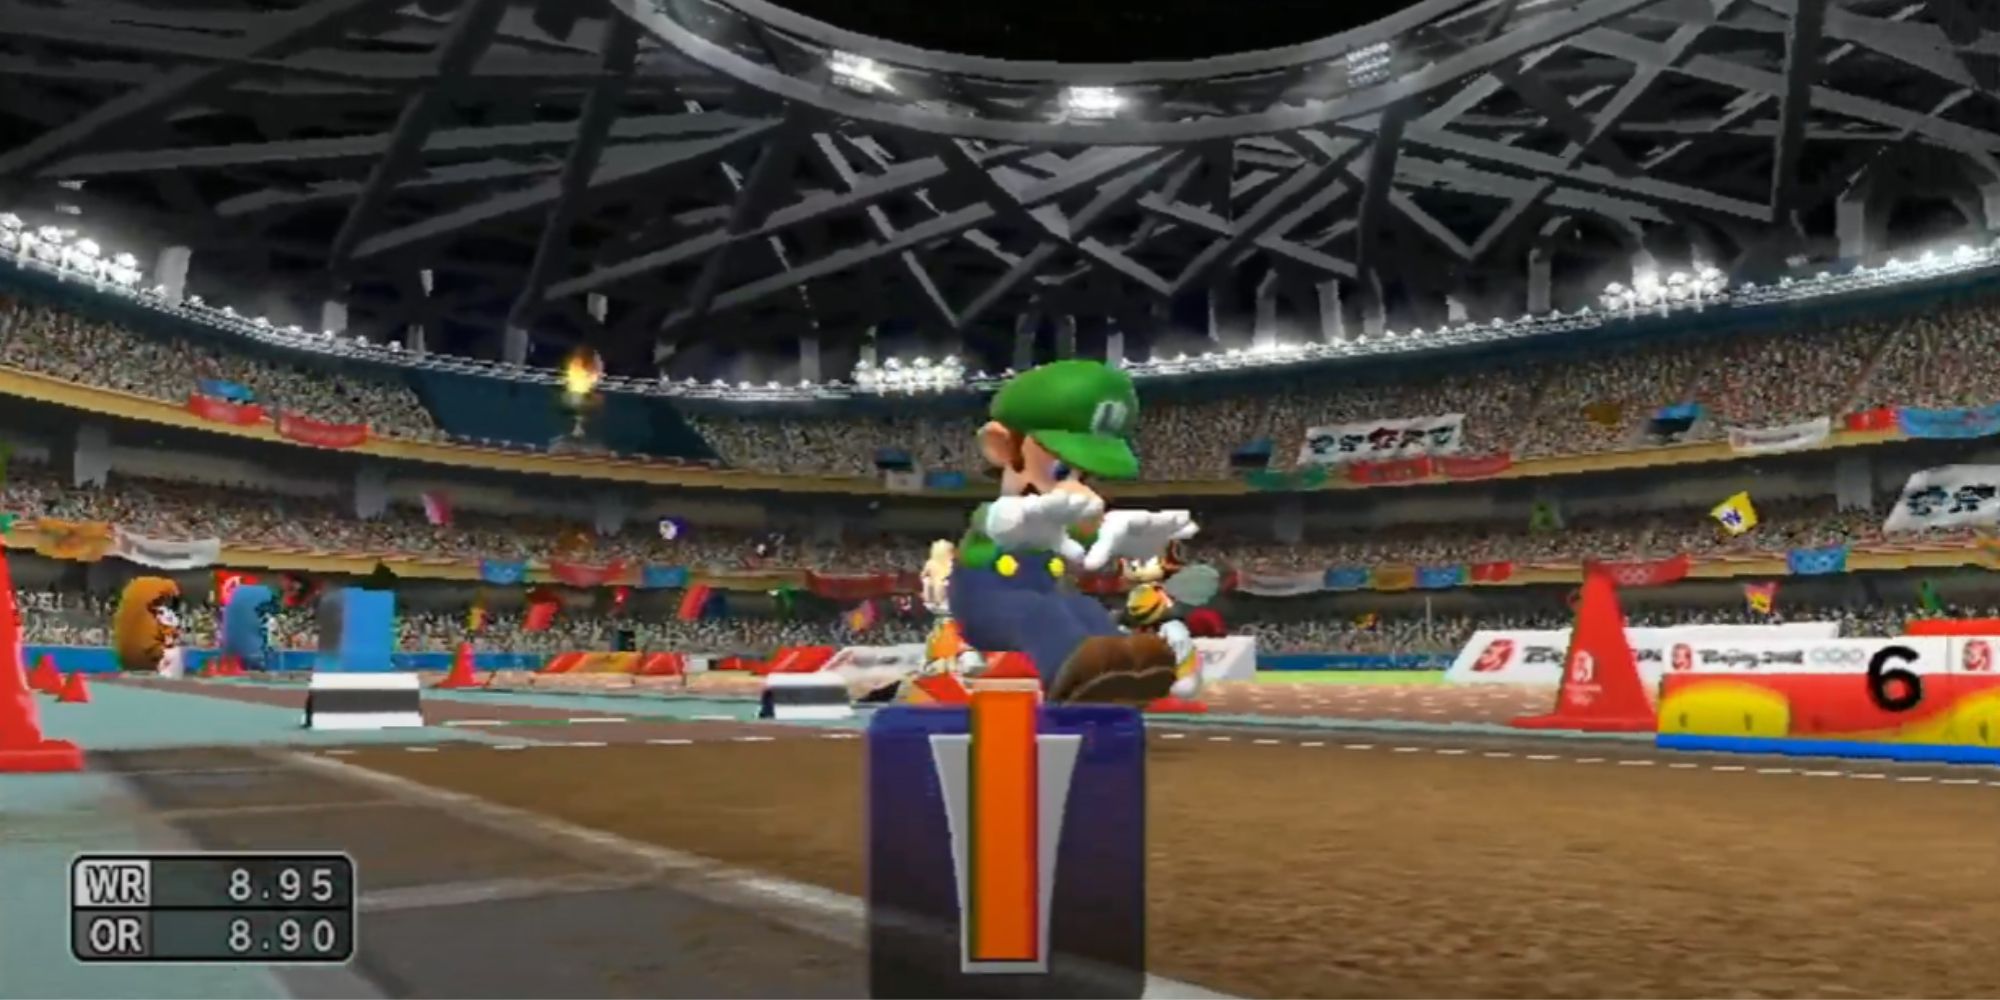 Luigi Longjumping in Mario and Sonic at the Olympic Games On The Wii